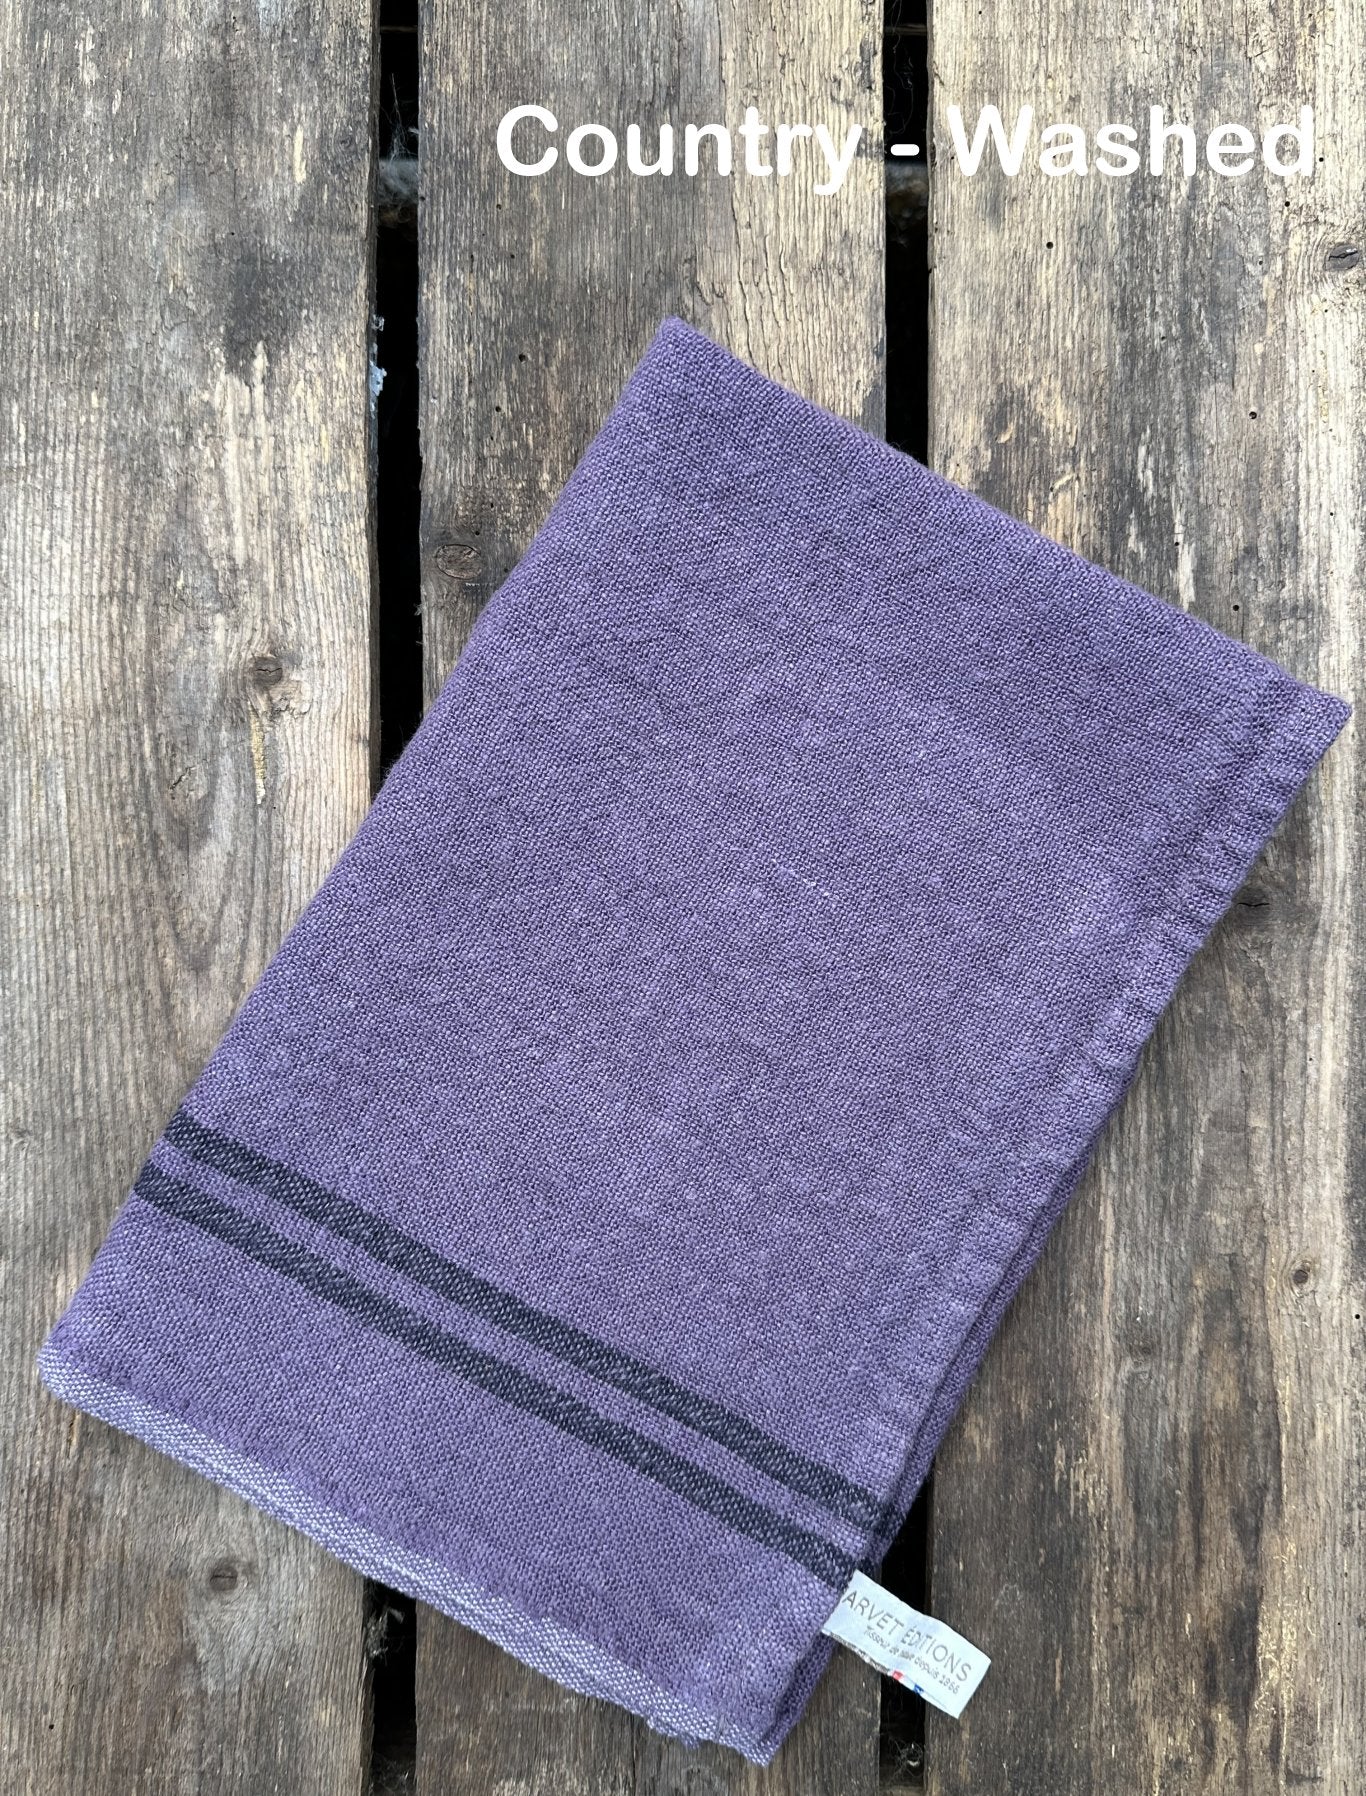 Charvet Editions "Country Washed & Dyed" (Aubergine), Woven linen tea towel. Made in France.